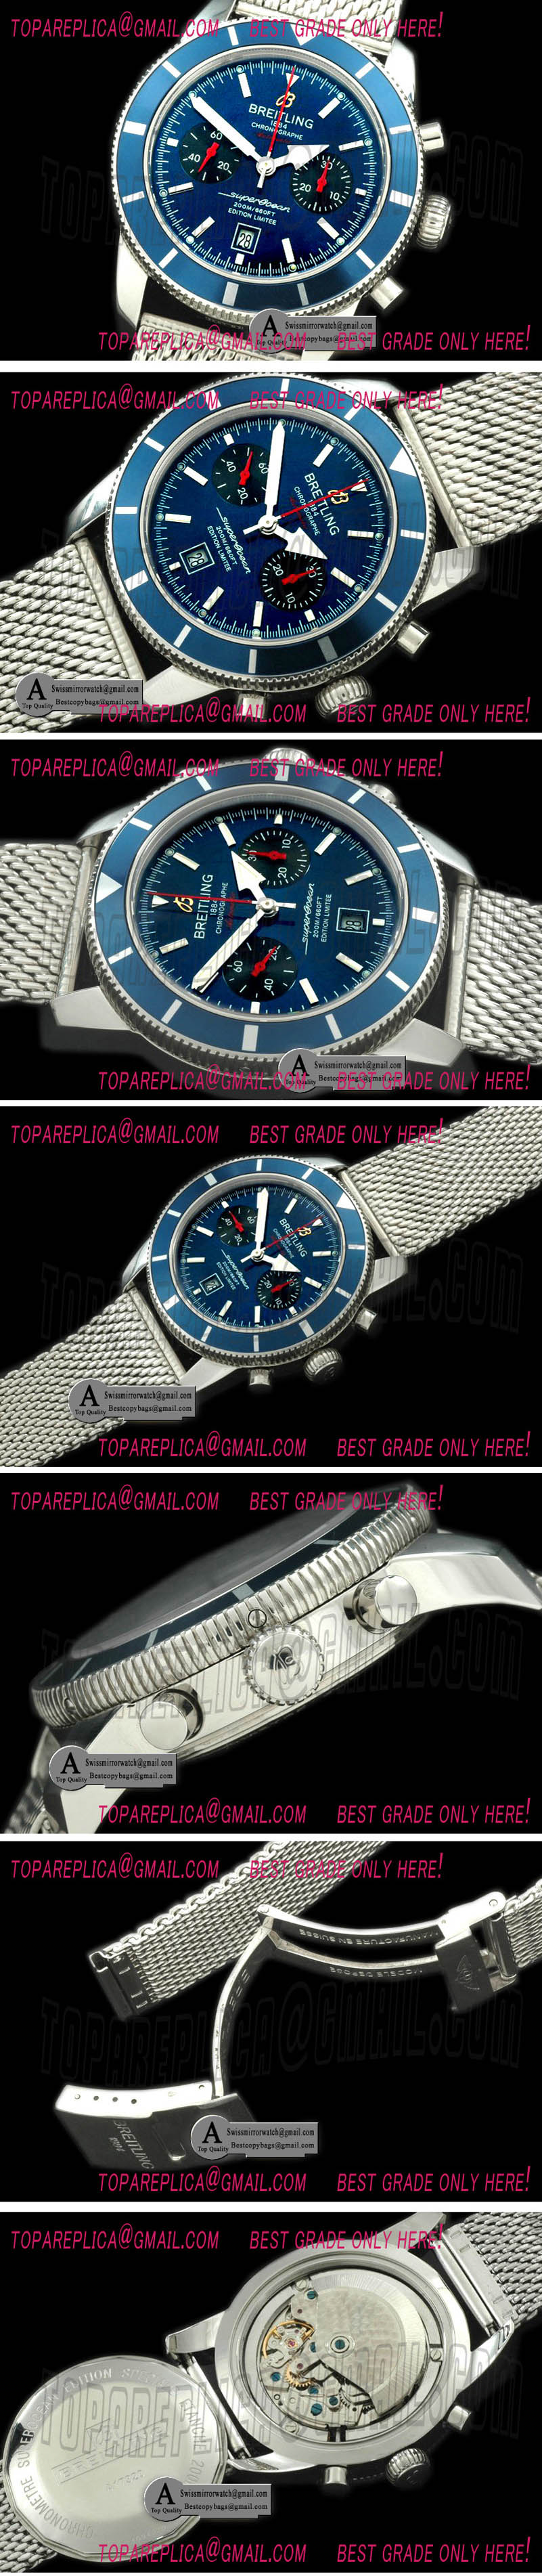 Breitling A2332024.C803.144A Superocean 2010 Heritage Chrono SS/ME Blue A-7750 Replica Watches